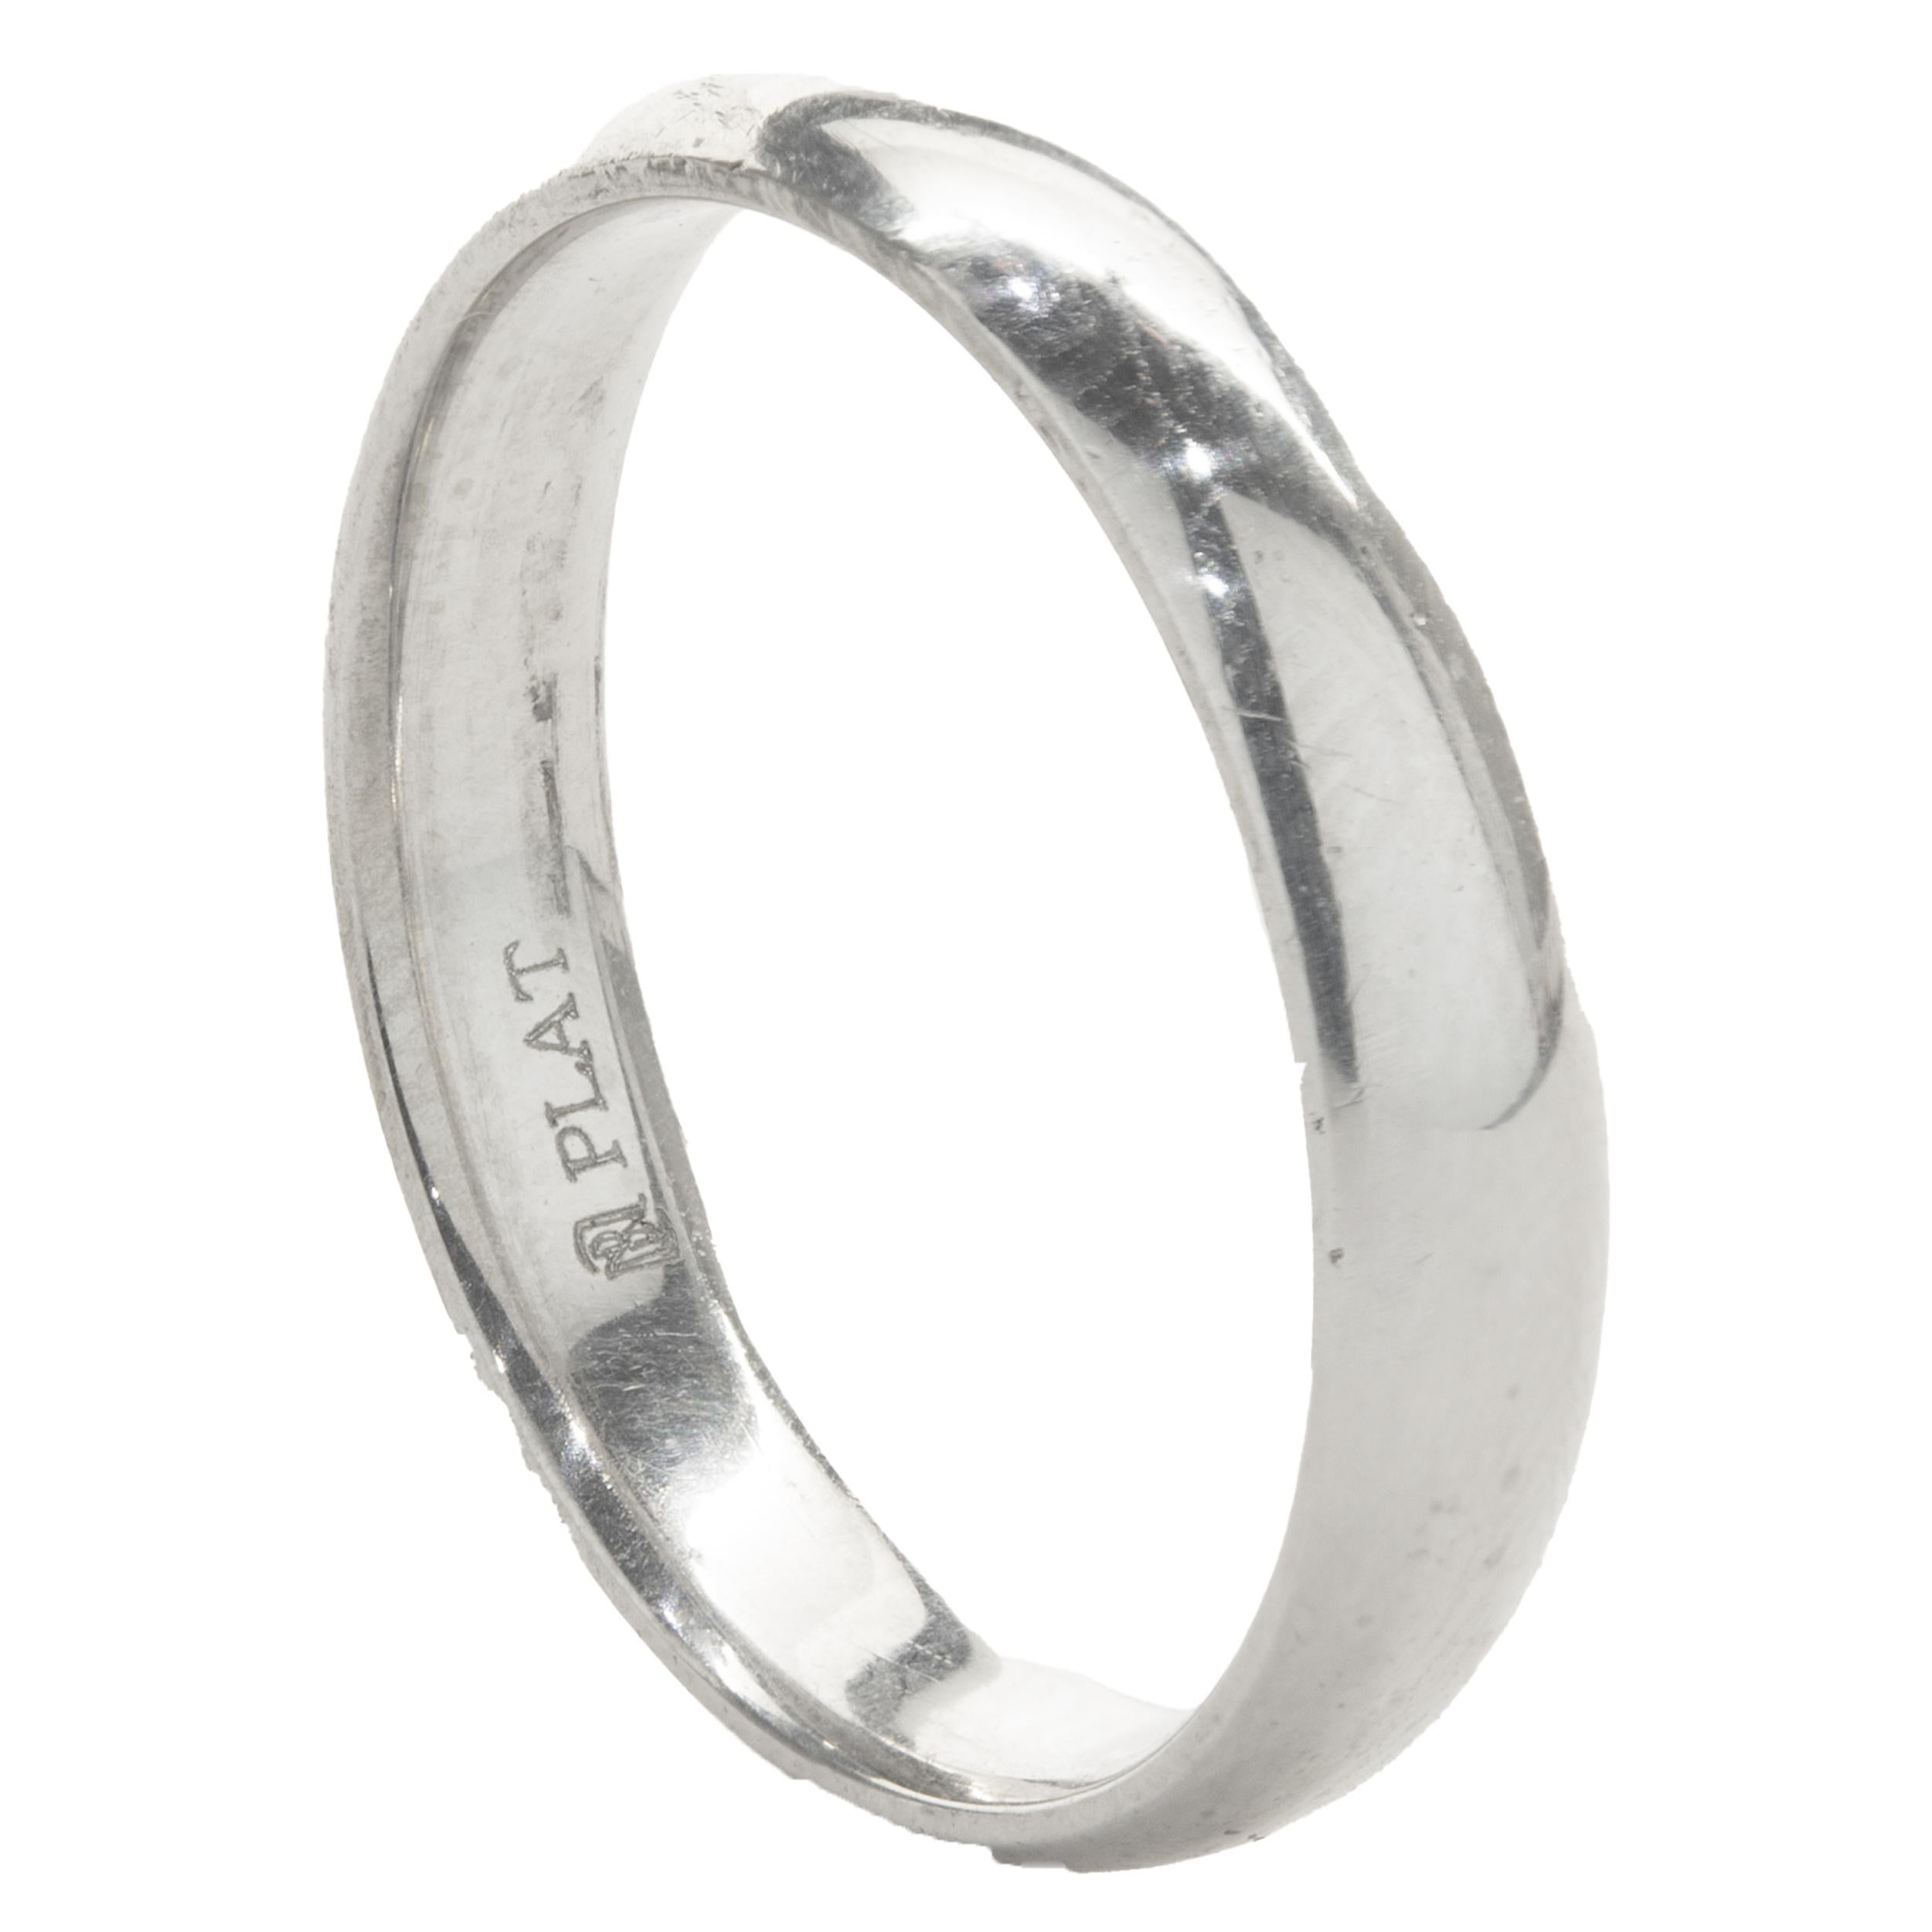 Designer: custom design
Material: platinum 
Dimensions: band measures 4mm wide
Weight: 6.48 grams
Size: 9 (complimentary sizing available) 